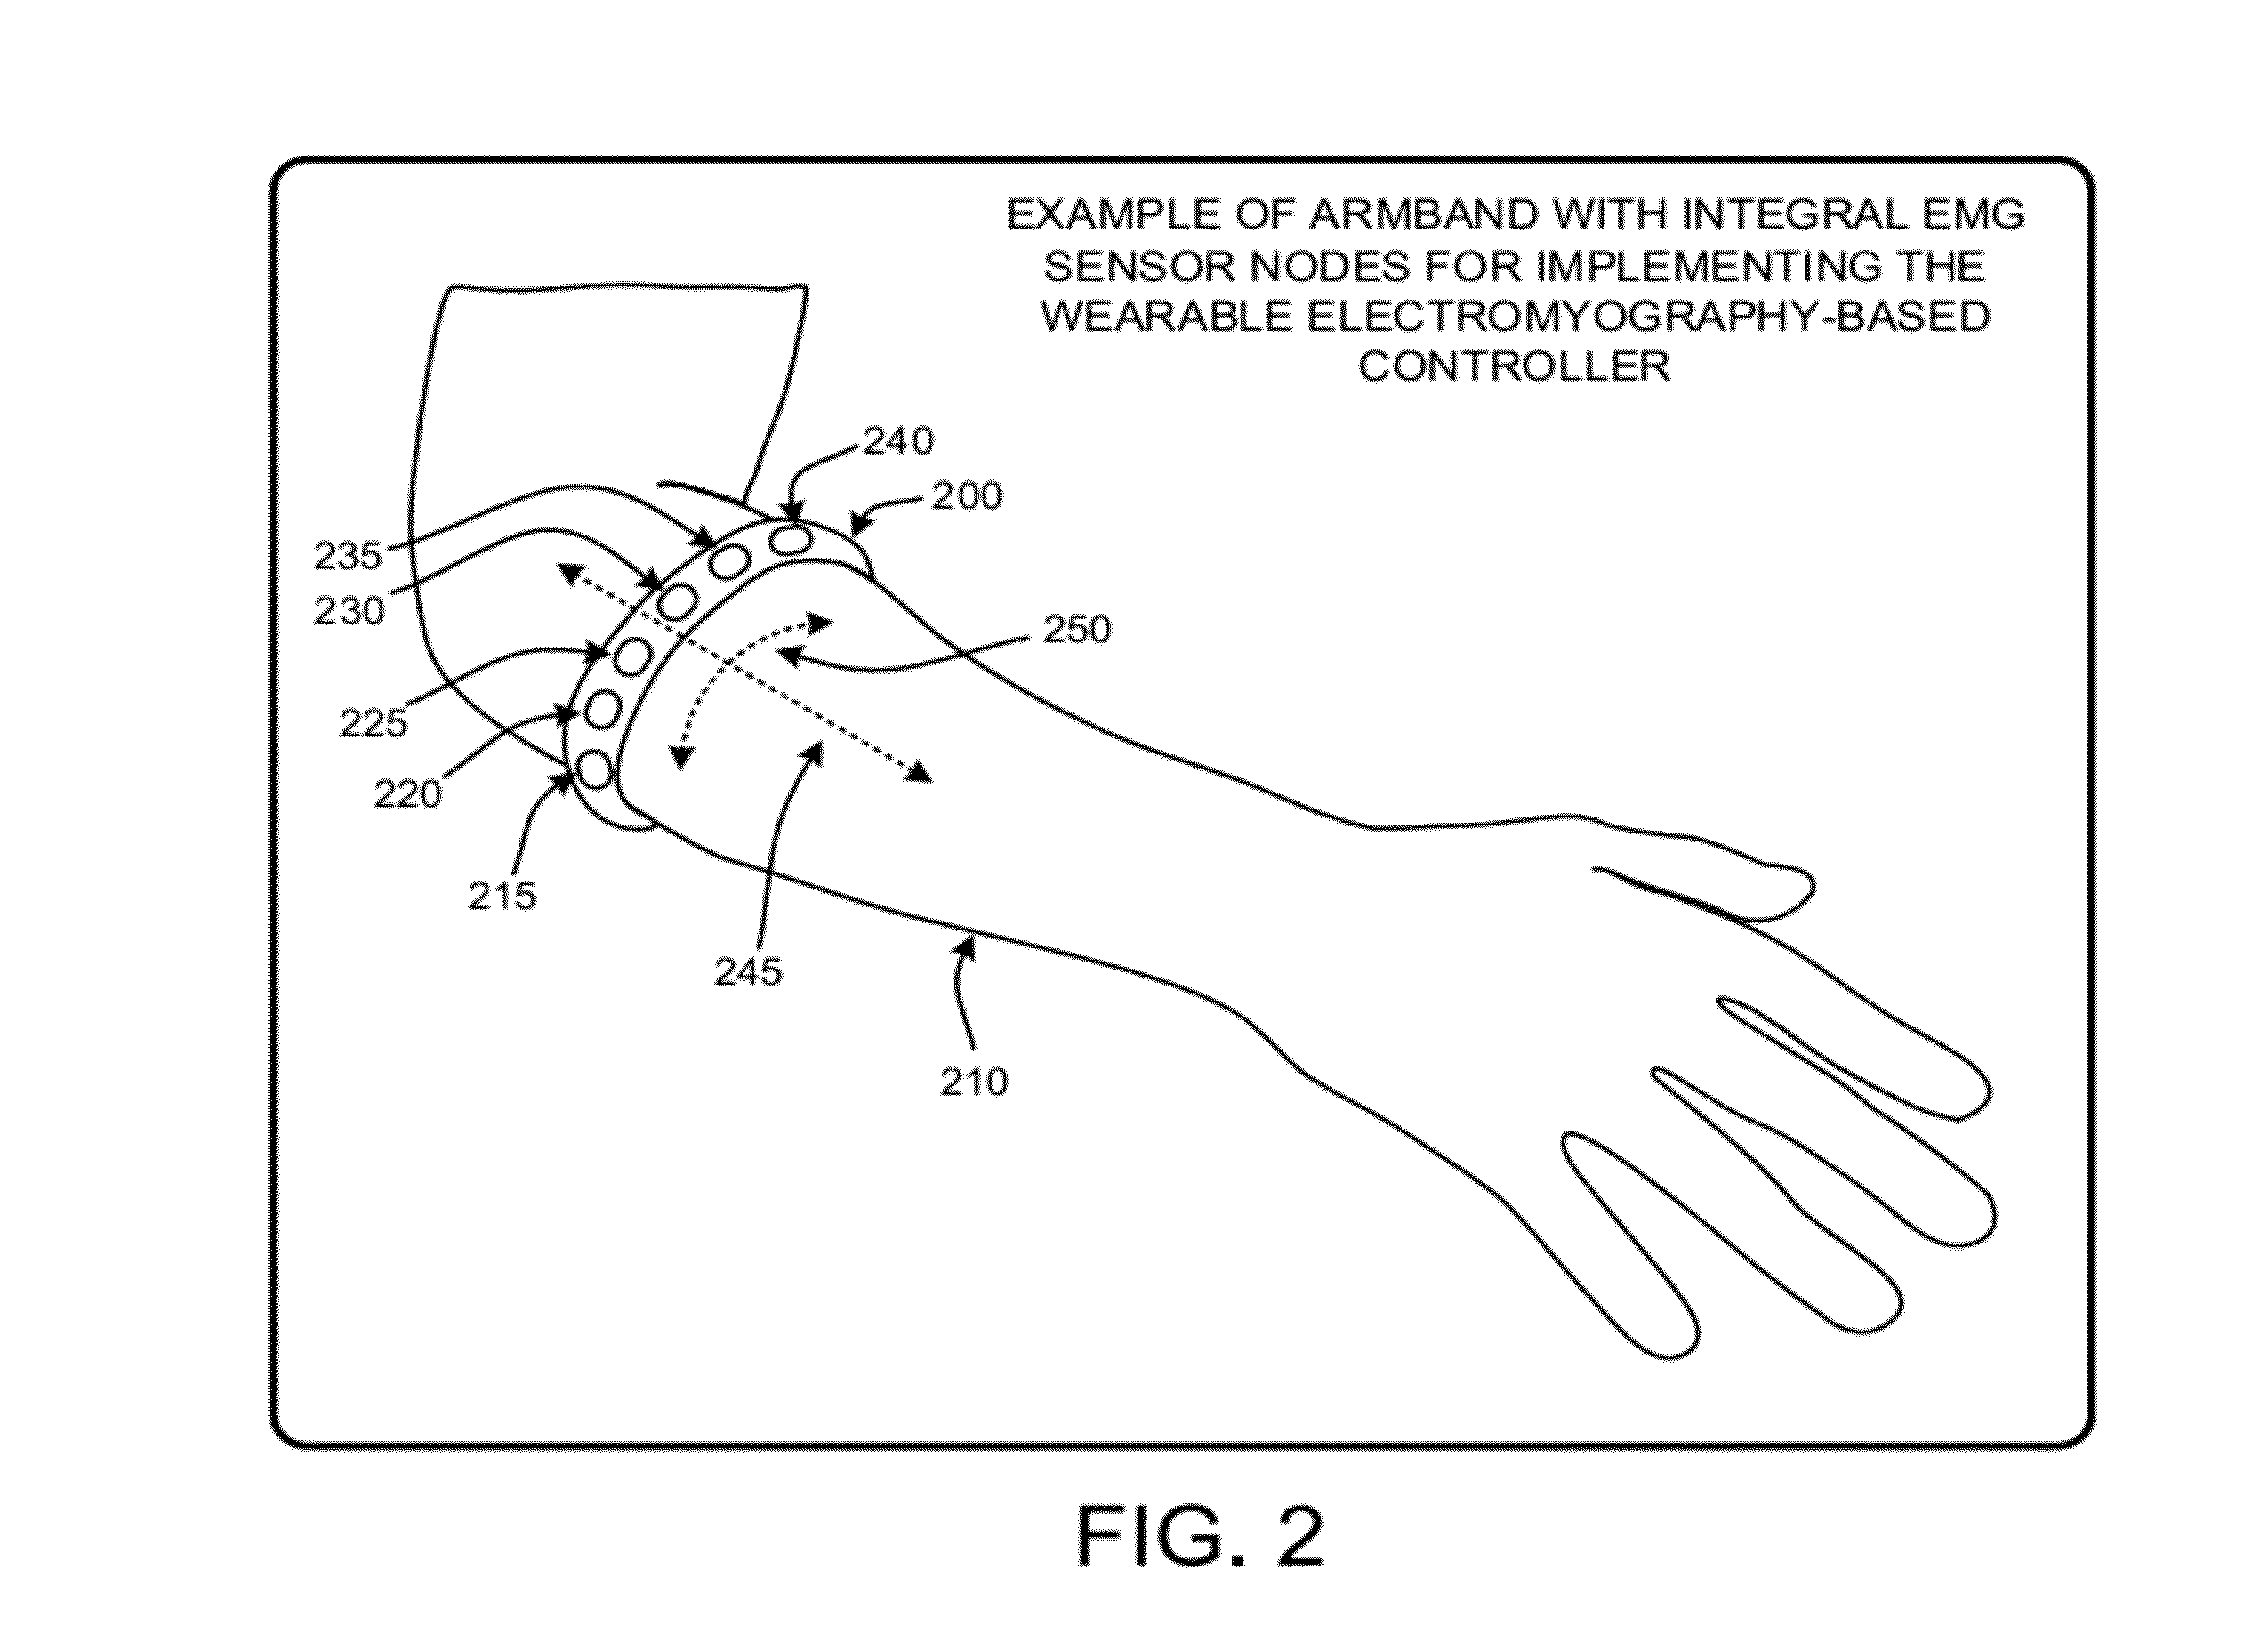 Wearable electromyography-based human-computer interface